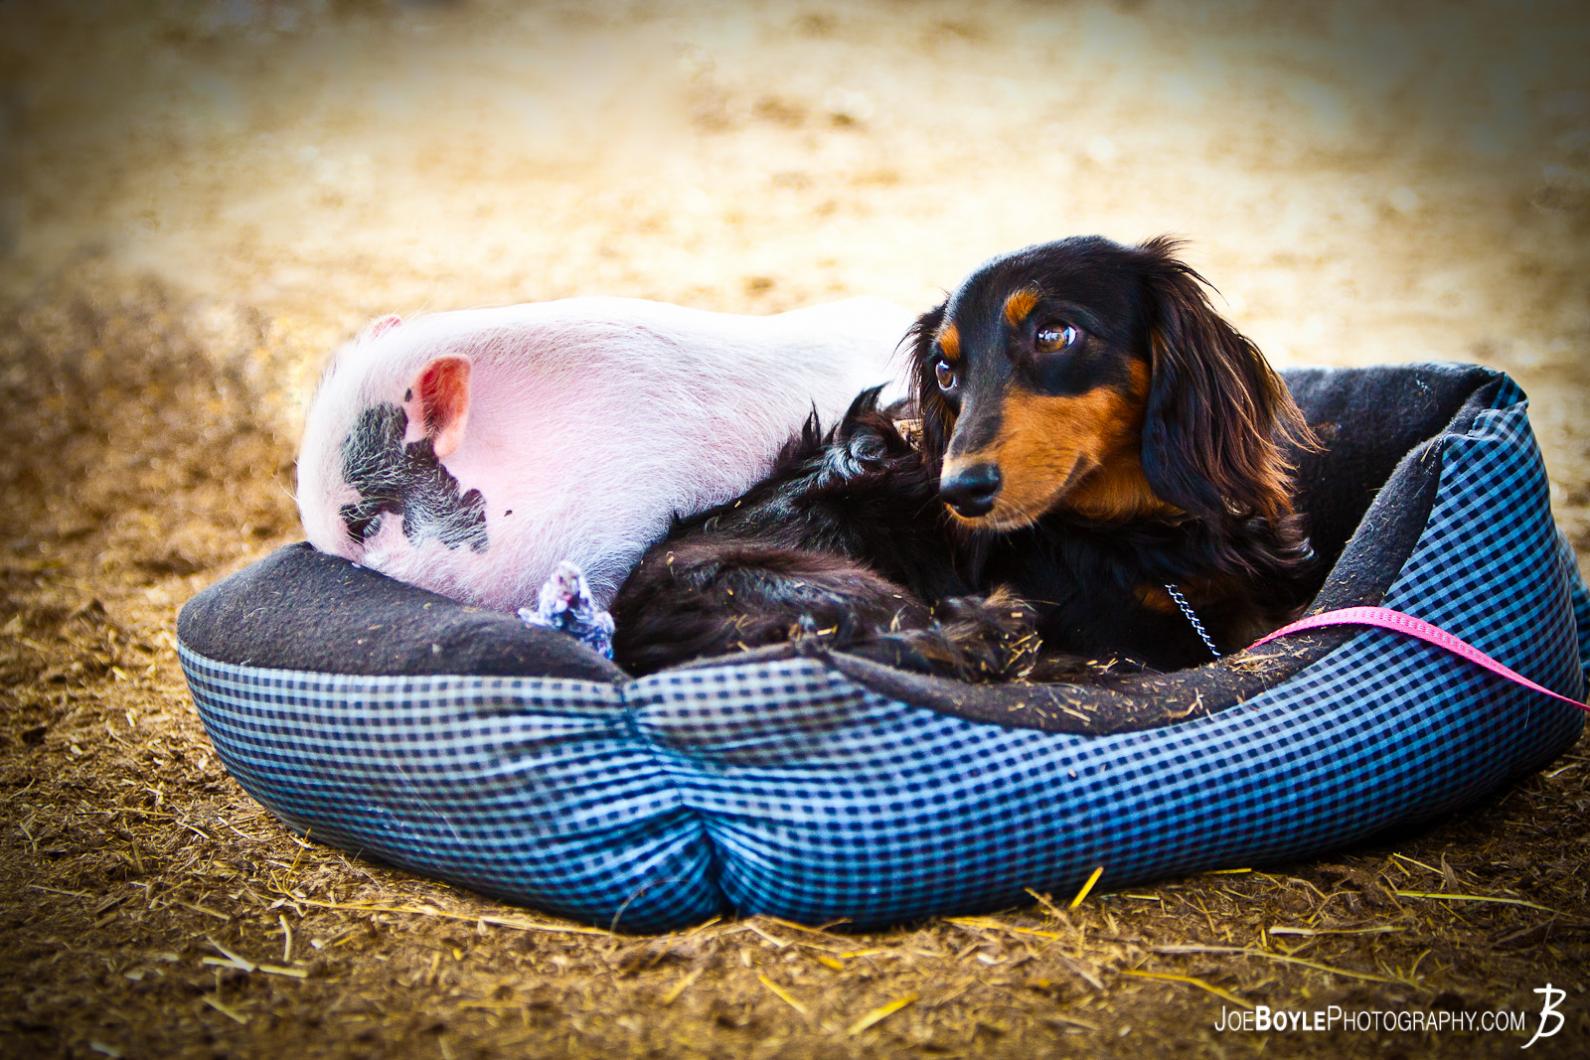 dog-pig-lying-together-in-a-bed